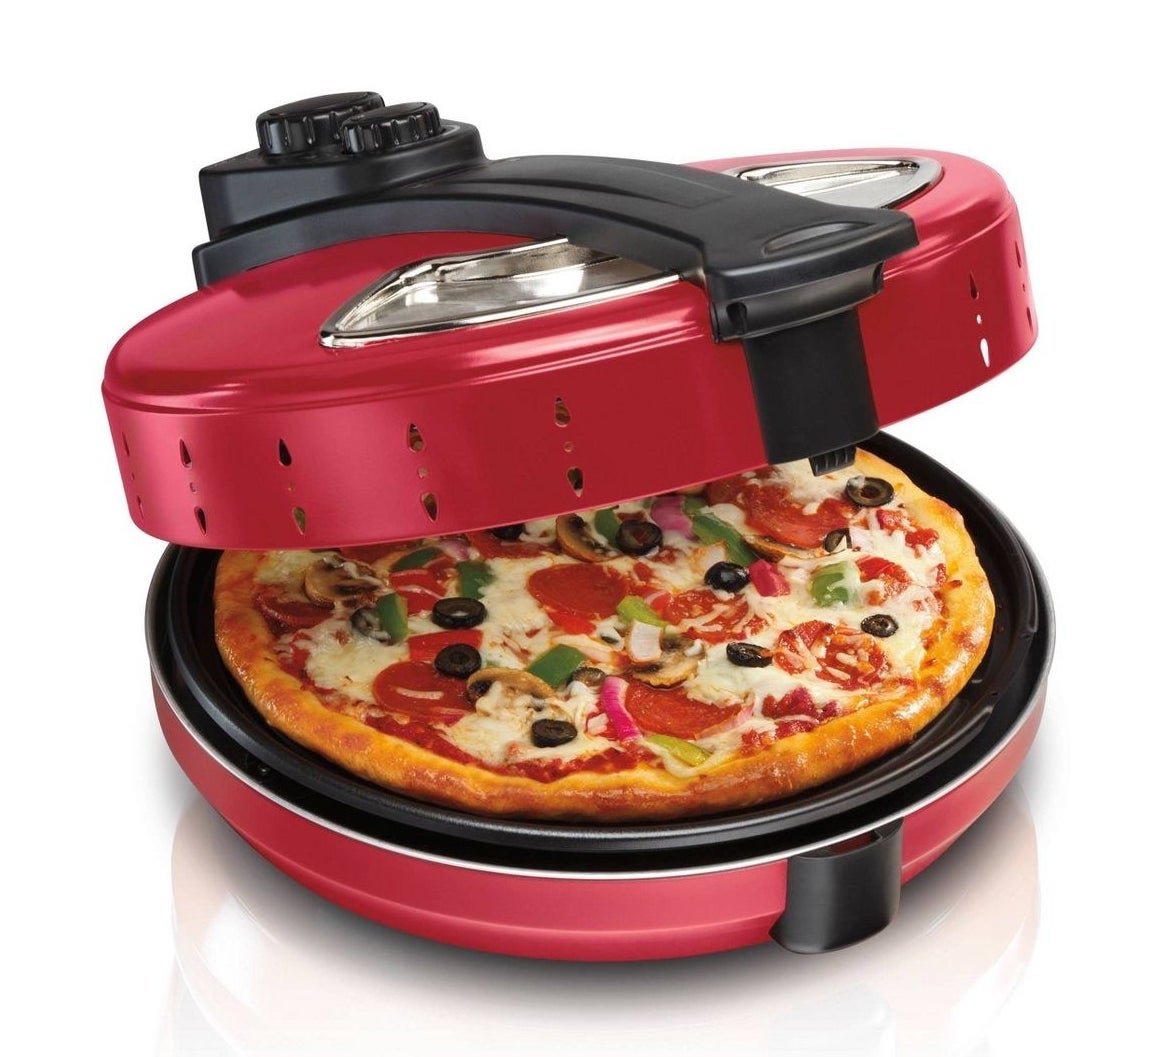 Red and black pizza oven